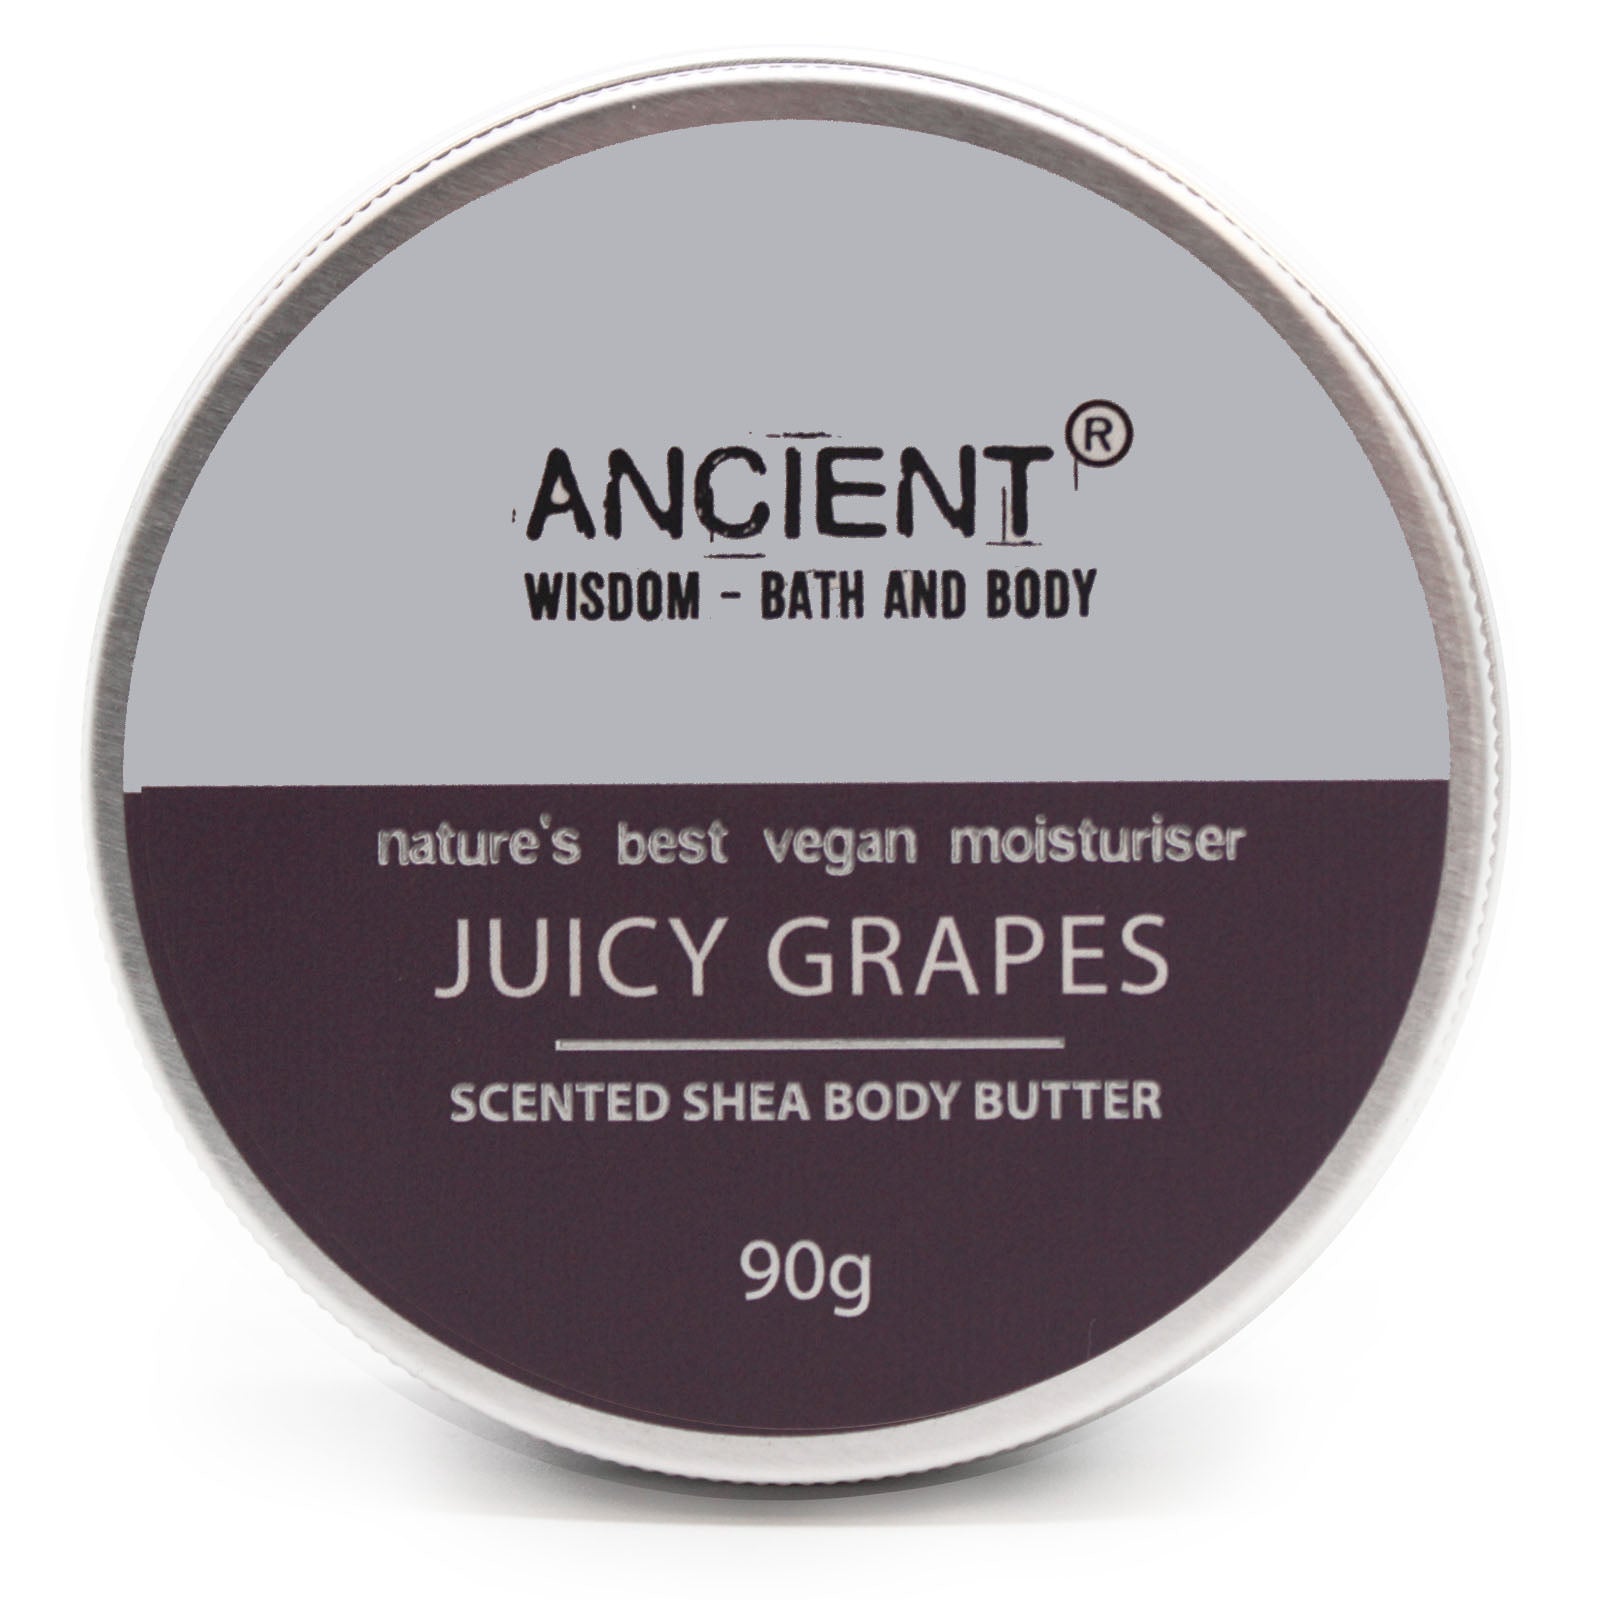 View Scented Shea Body Butter 90g Juicy Grapes information